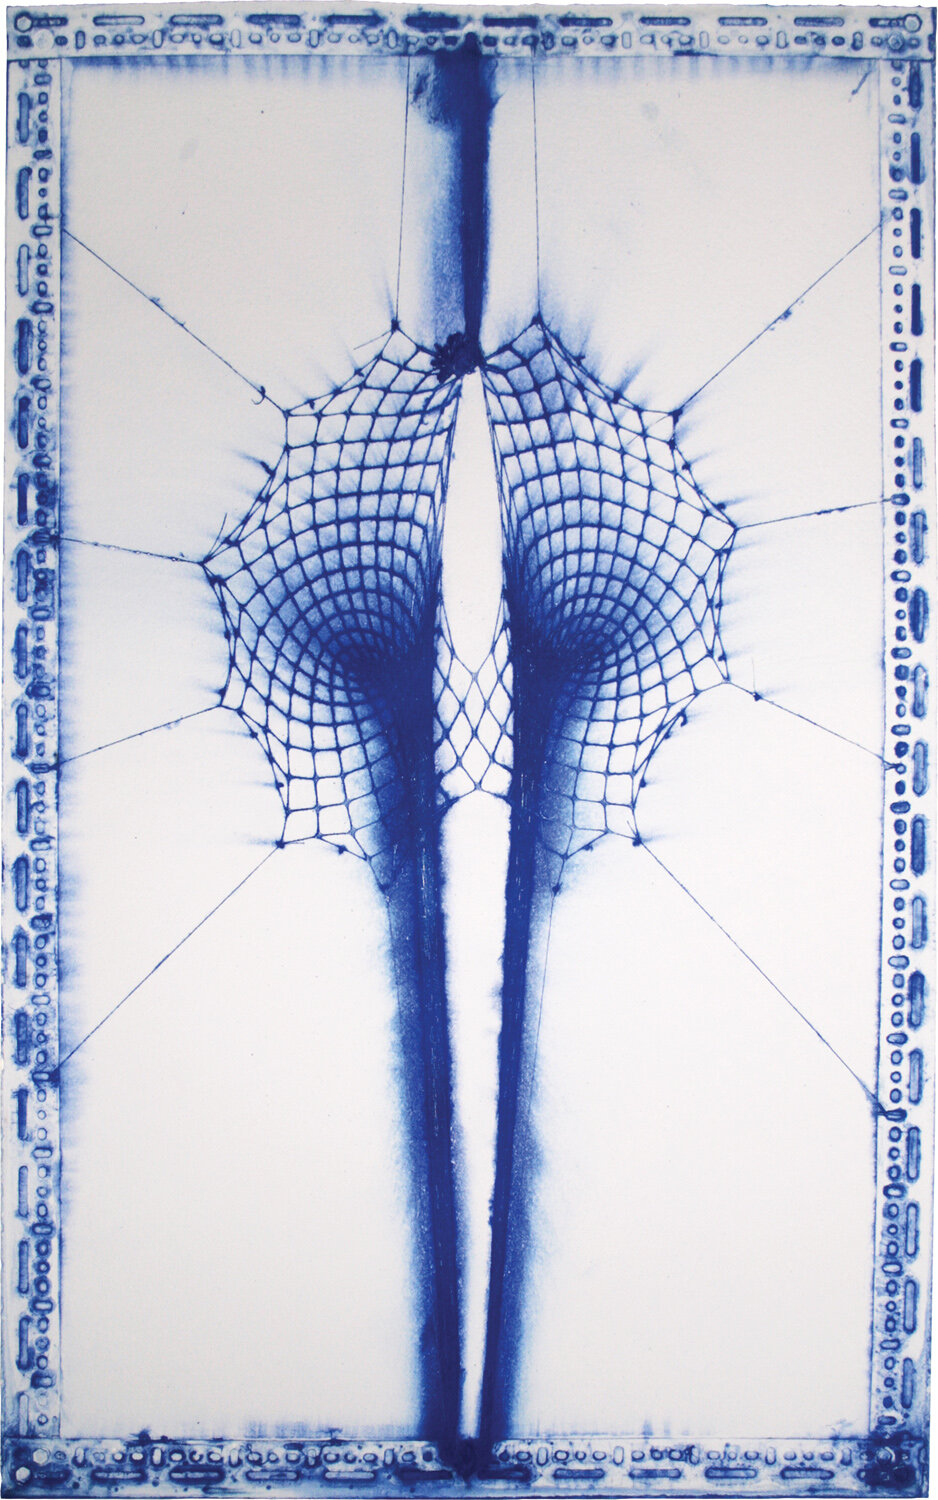  E.V. Day,  Double Black Hole (Blue and White) , 2009, Fishnet bodysuit pigment embossing on cotton base sheet, 58 x 35.75 inches. 